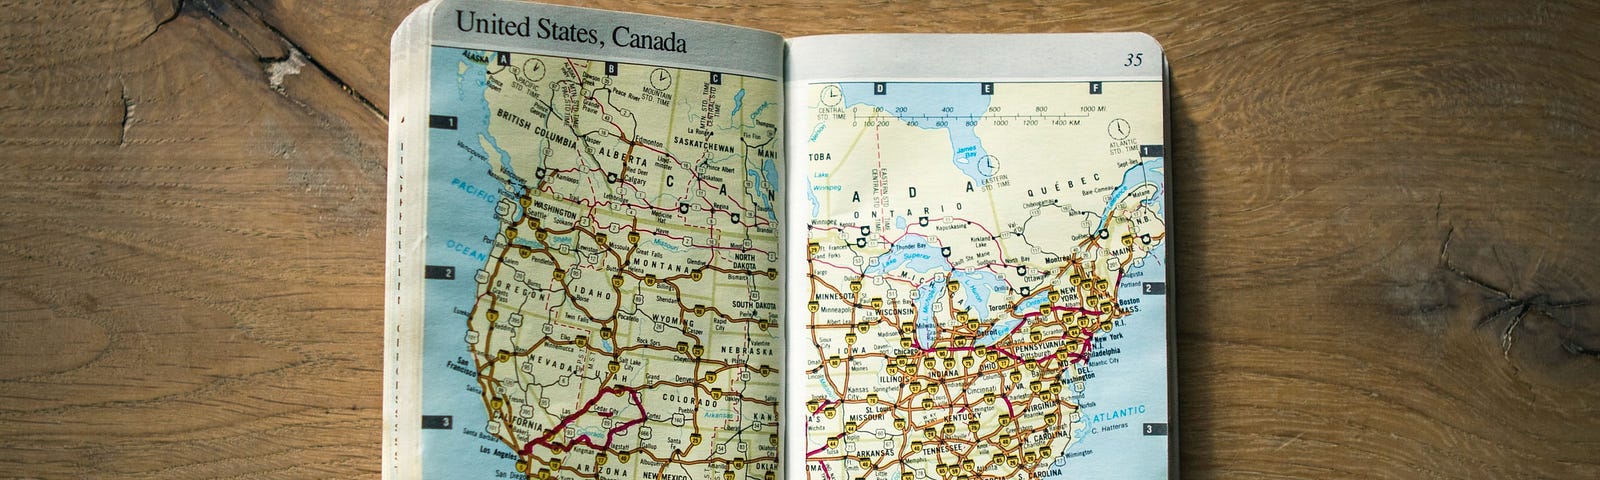 An atlas of the US and Canada.